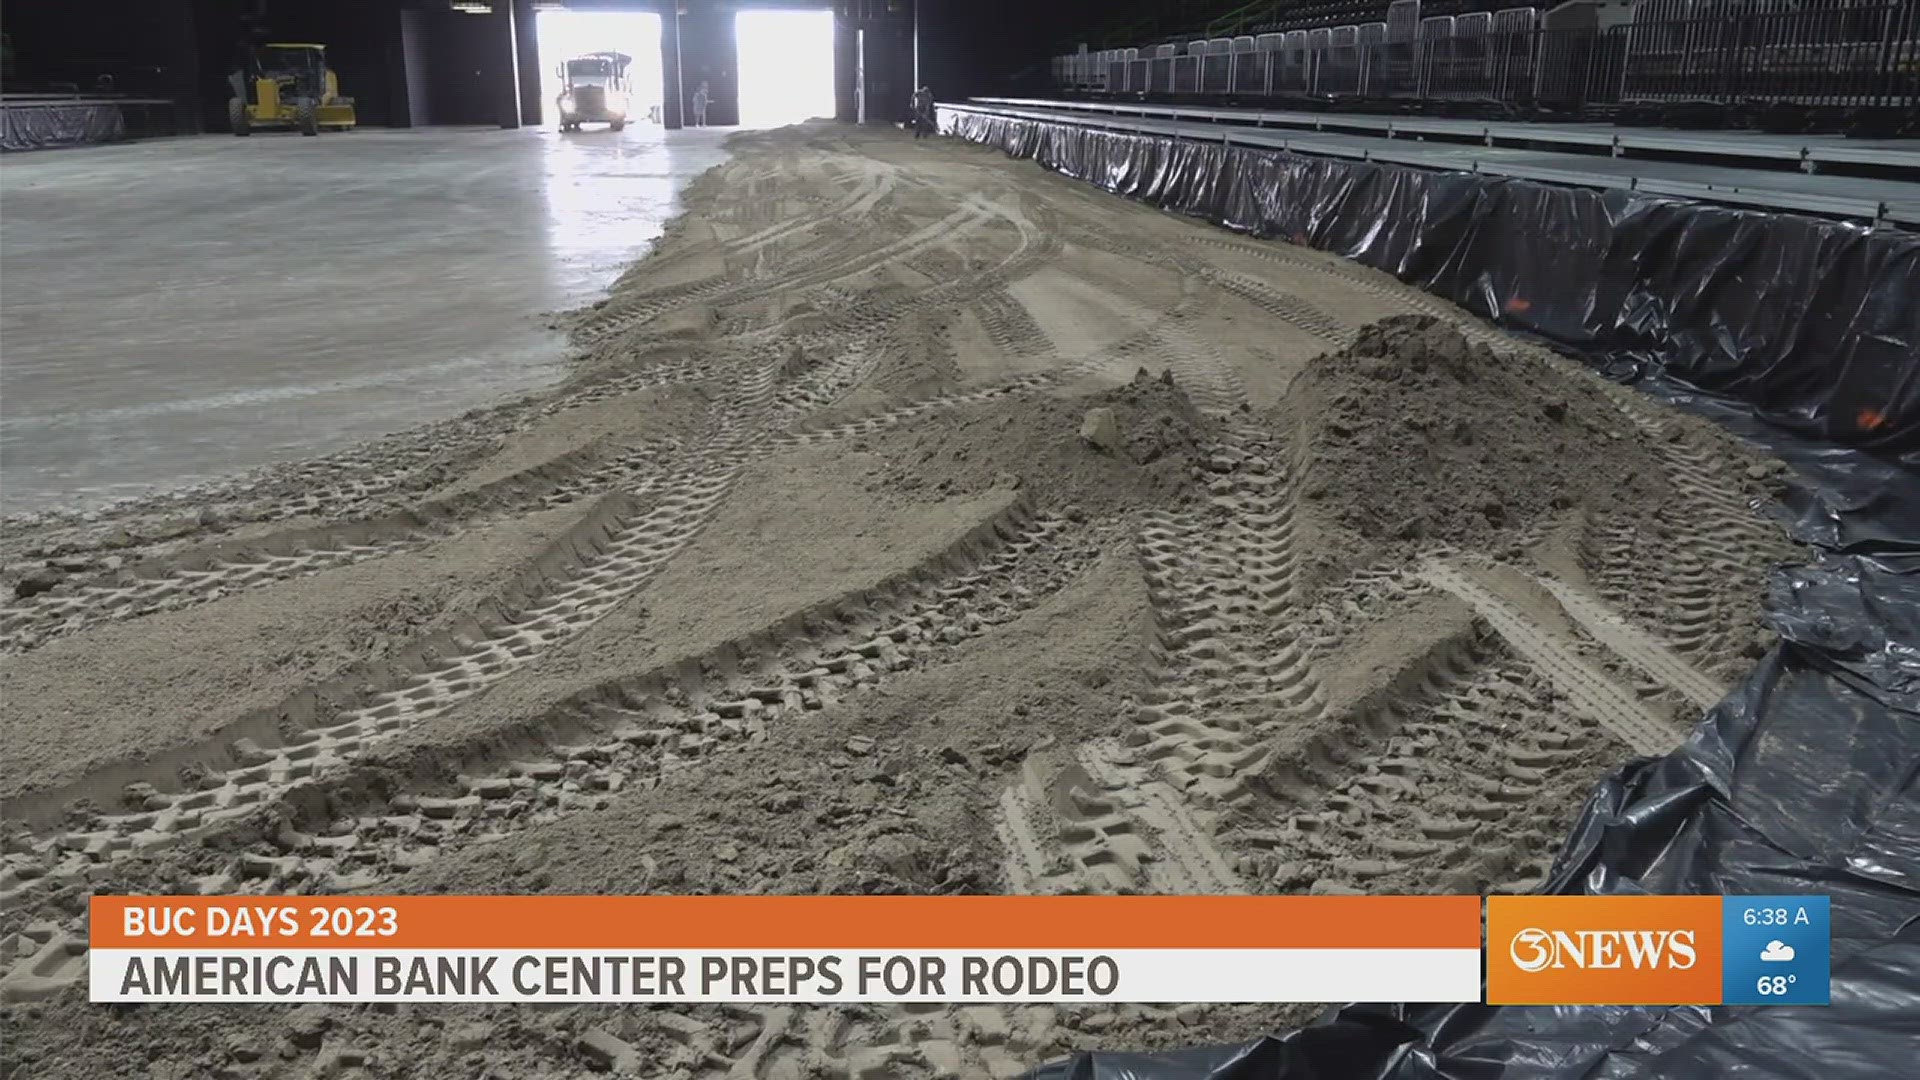 Dirt was laid in the arena Tuesday and shops are already being set up in Treasure Island.